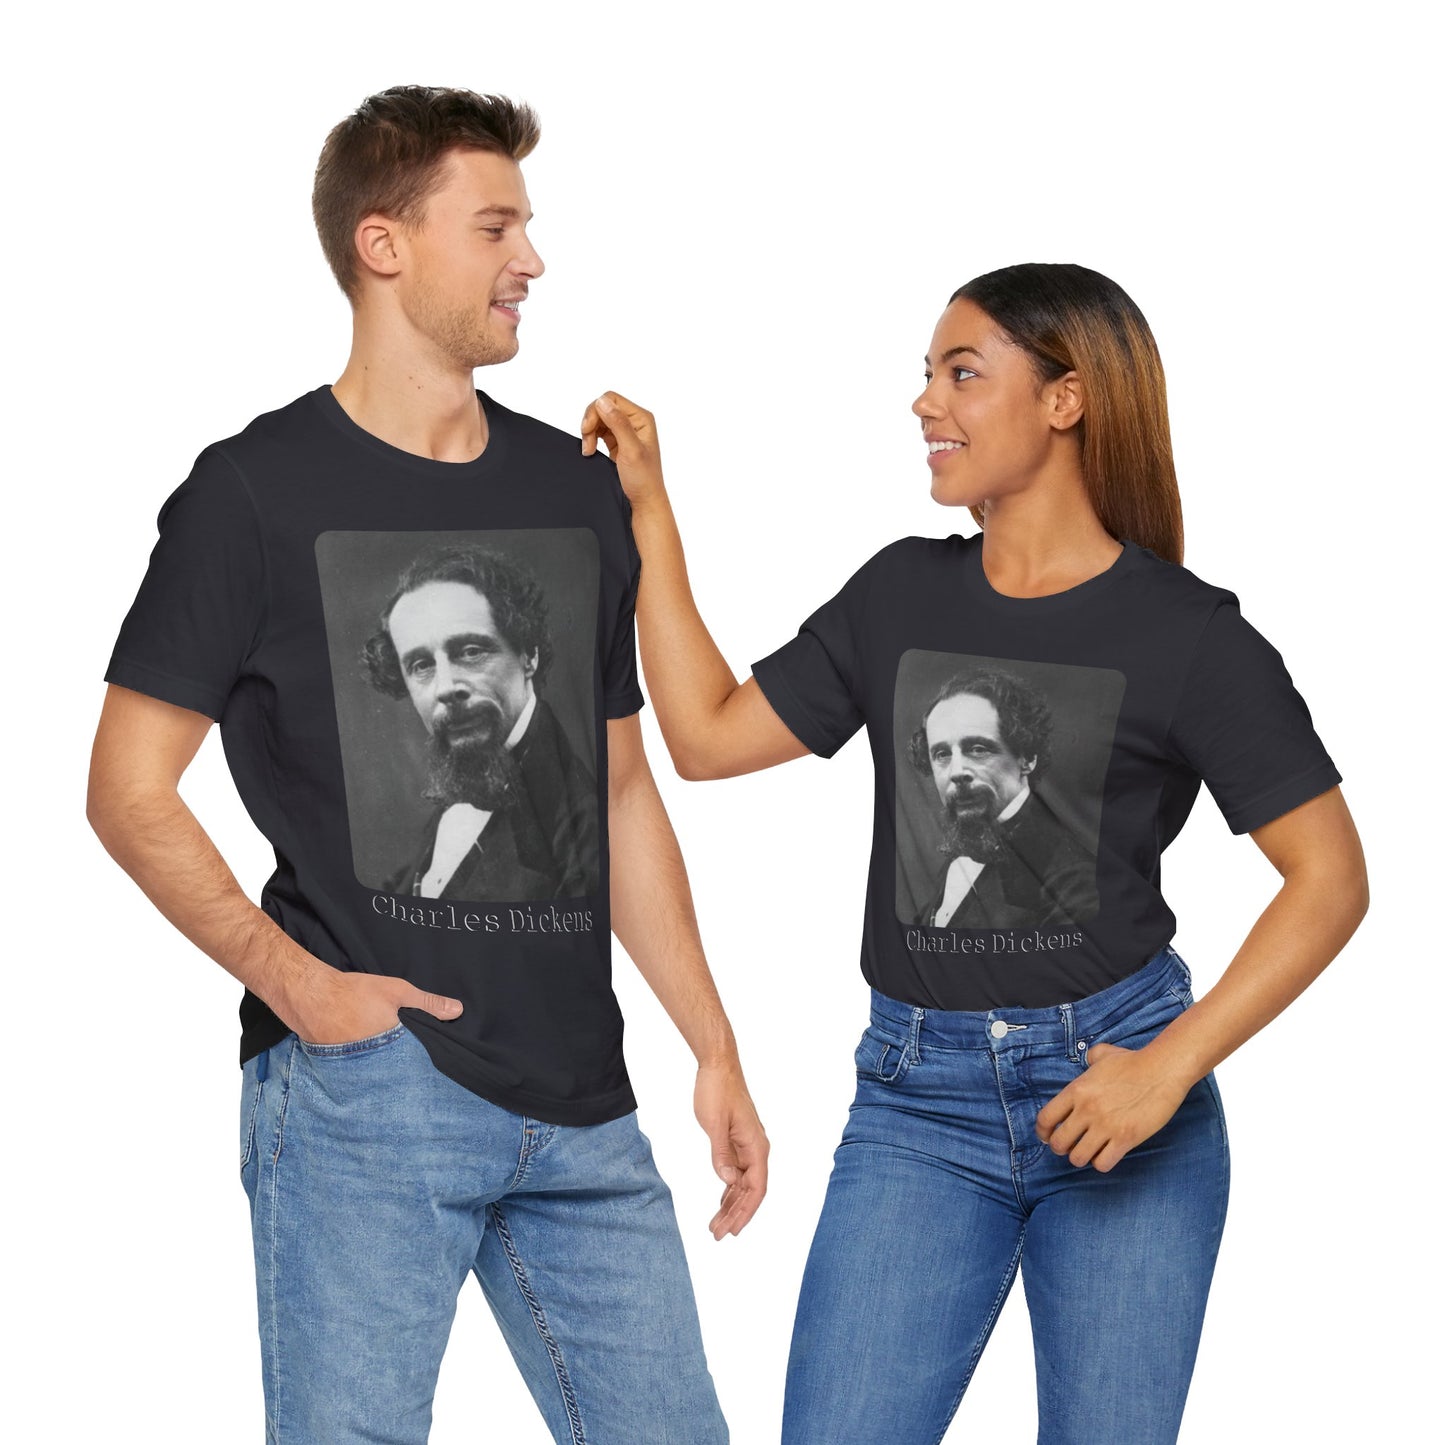 Charles Dickens - Hemingway Line - Hurts Shirts Collection